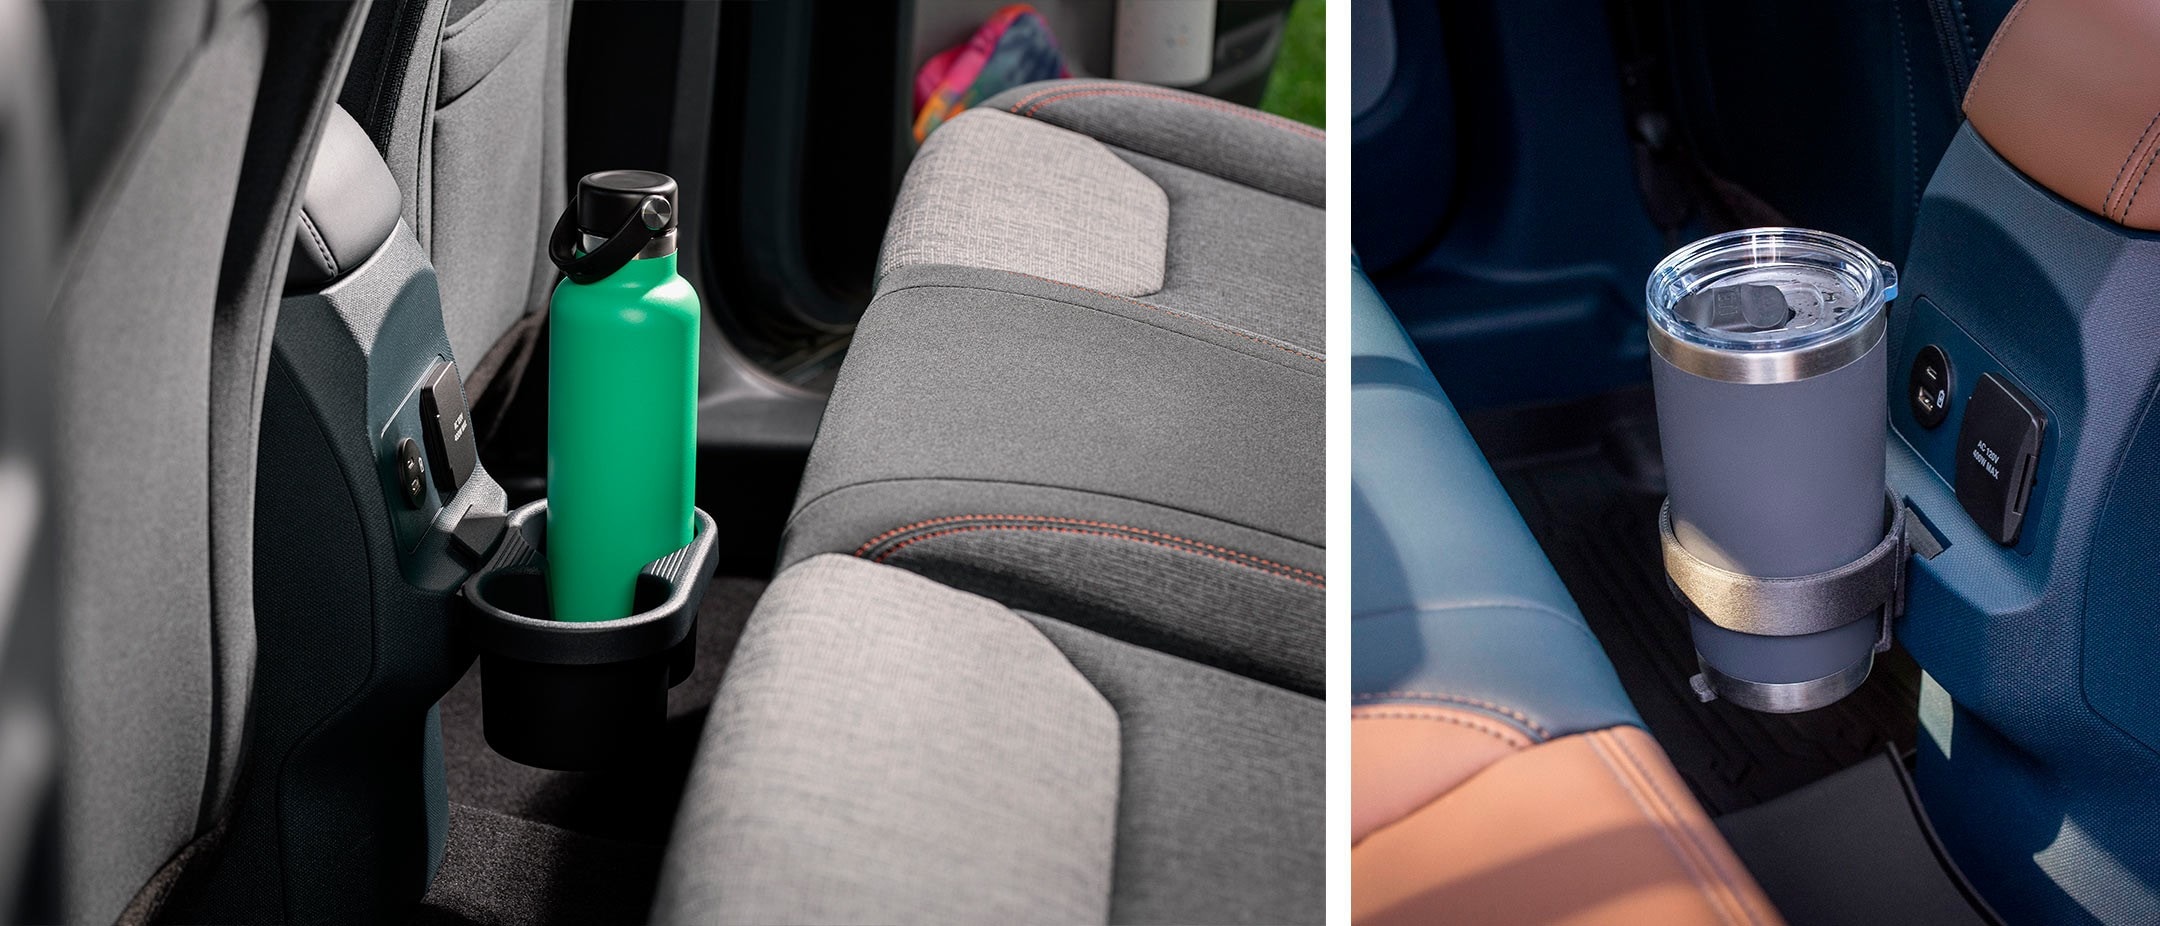 Ford is encouraging customers to 3D print their own FITS-compatible accessories. Image via Ford.